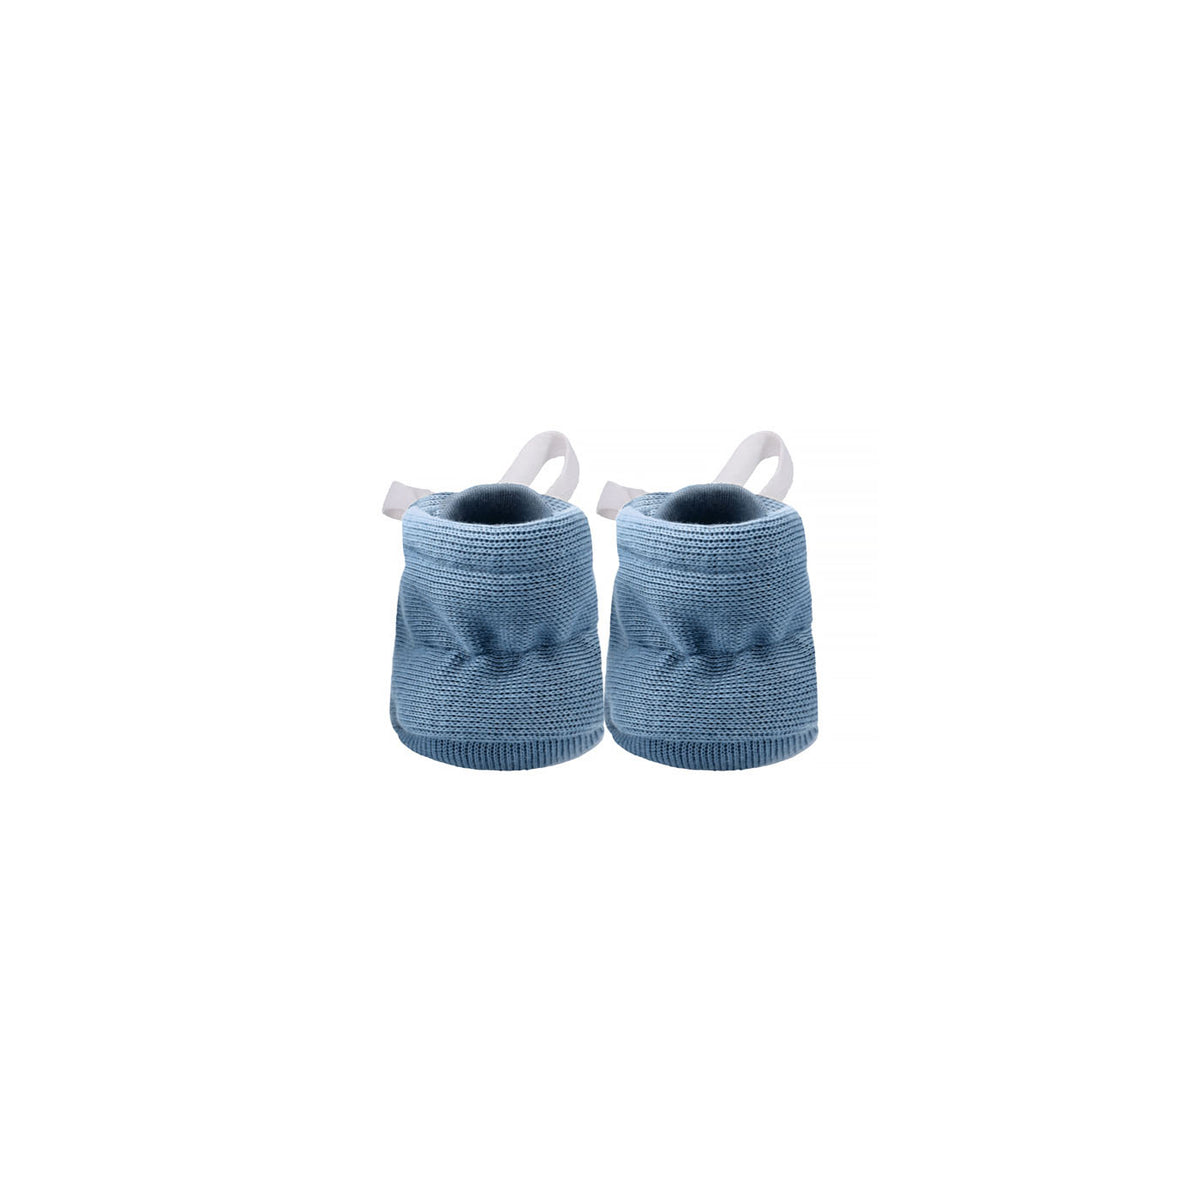 back view of uaua baby booties in azul color